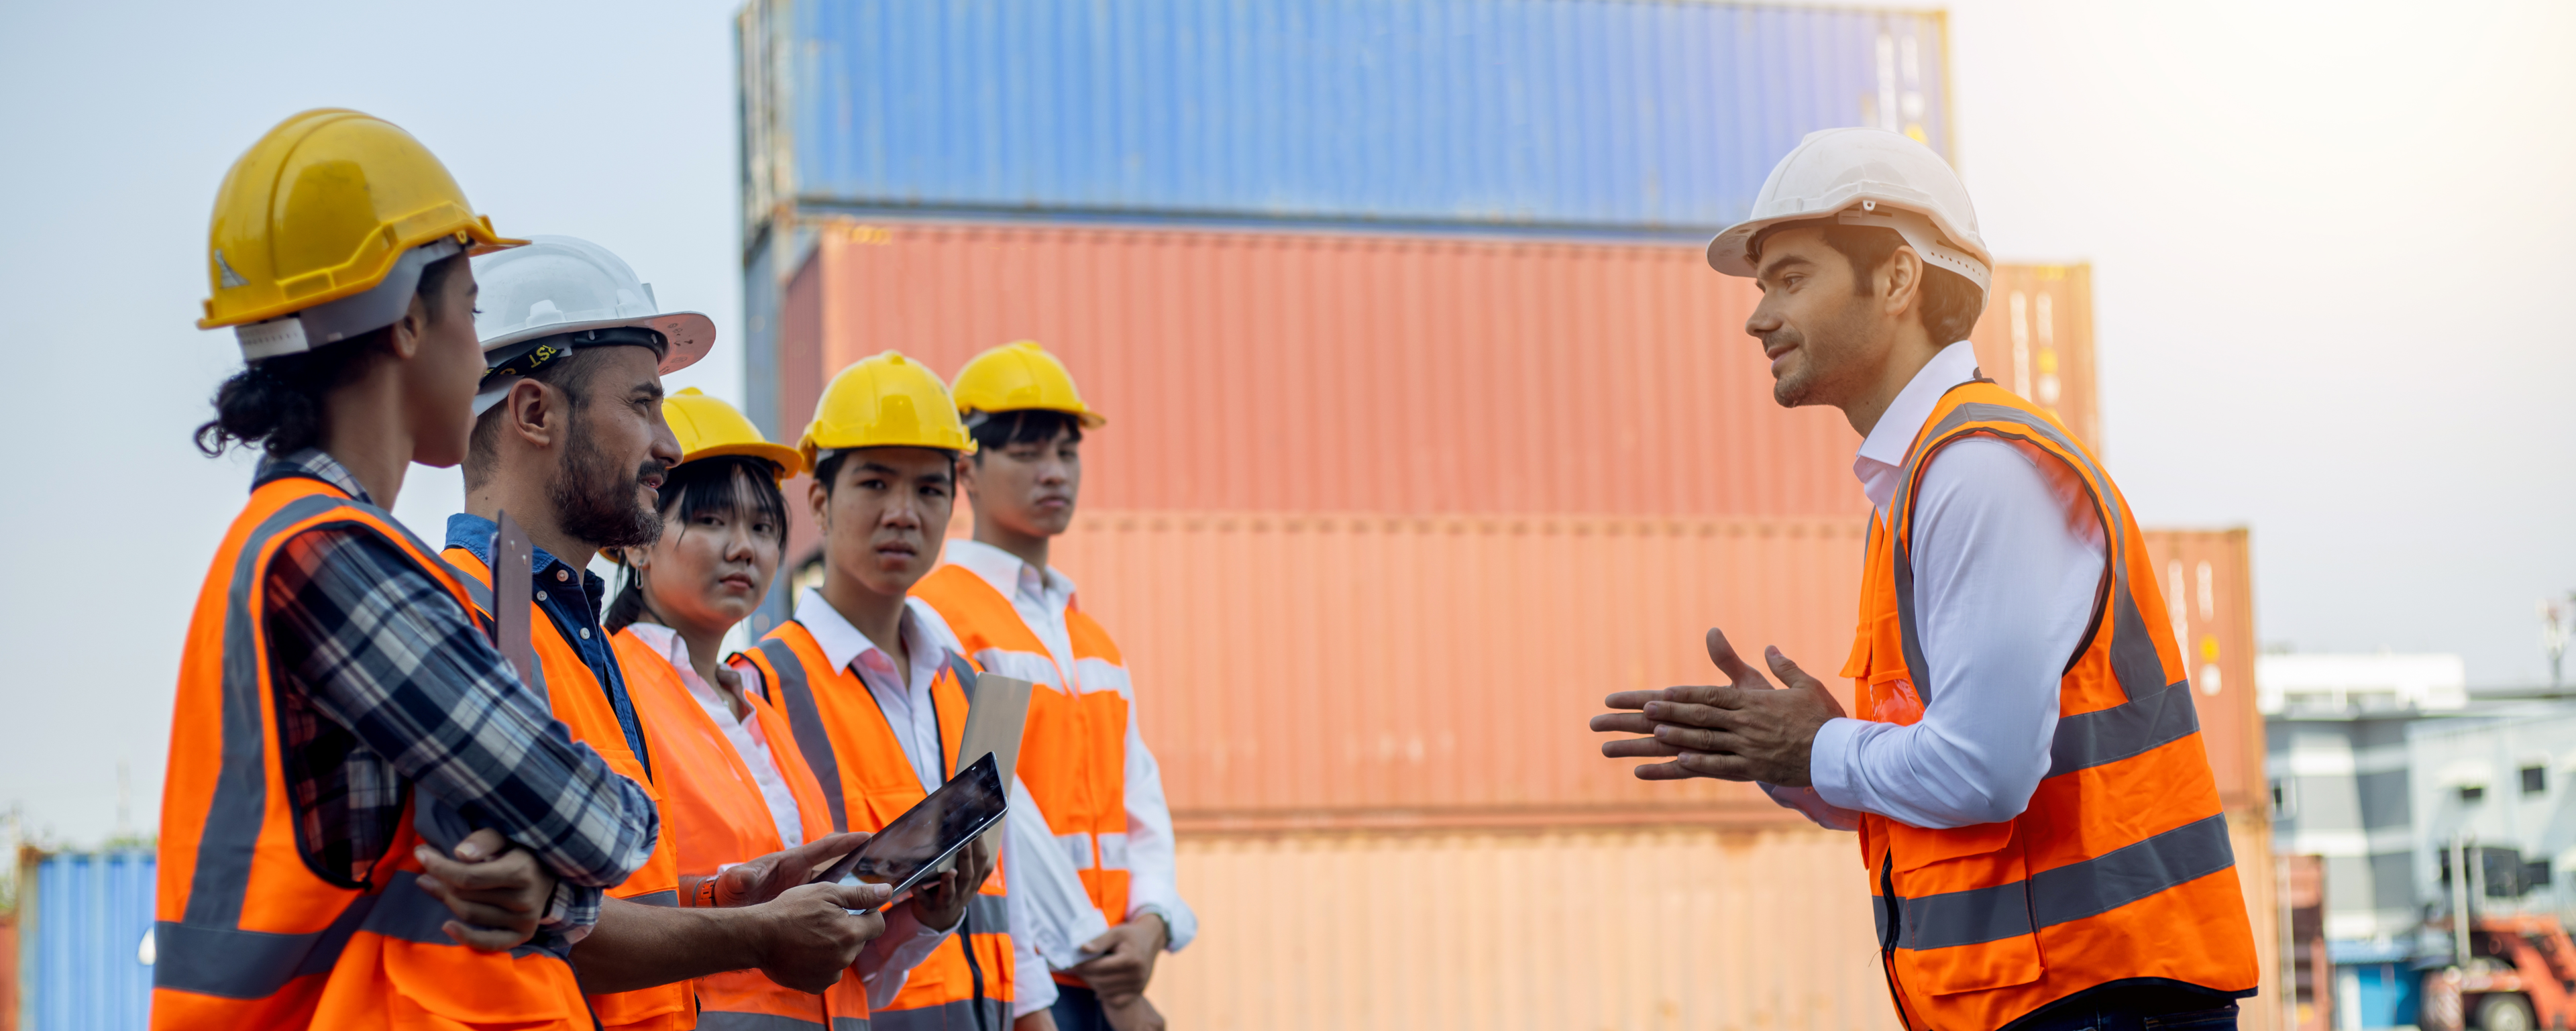 The role of safety training in the workplace - risk assessment - safety training providers